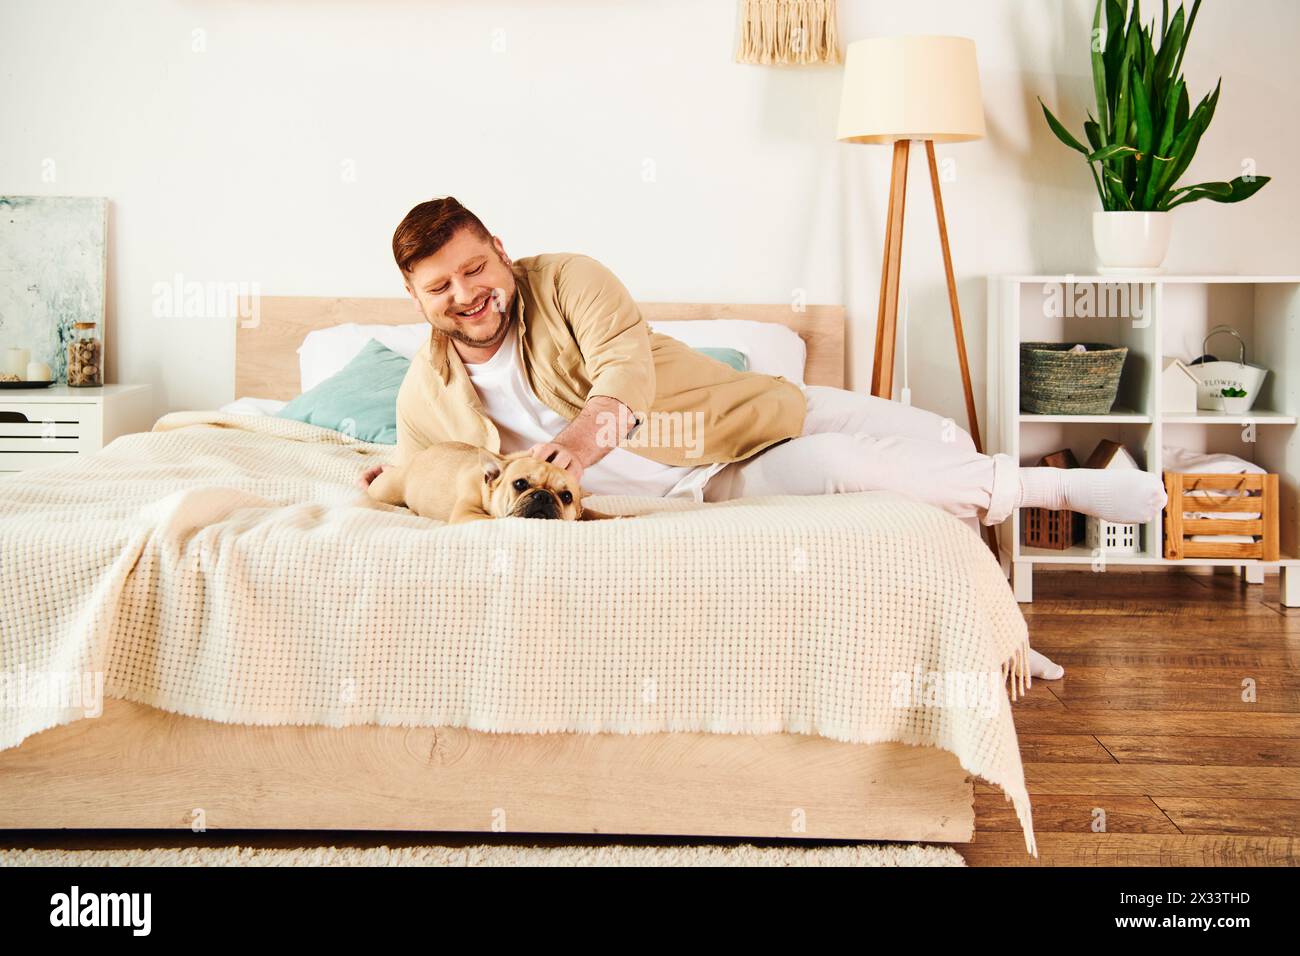 A handsome man relaxing on a bed with his French Bulldog. Stock Photo